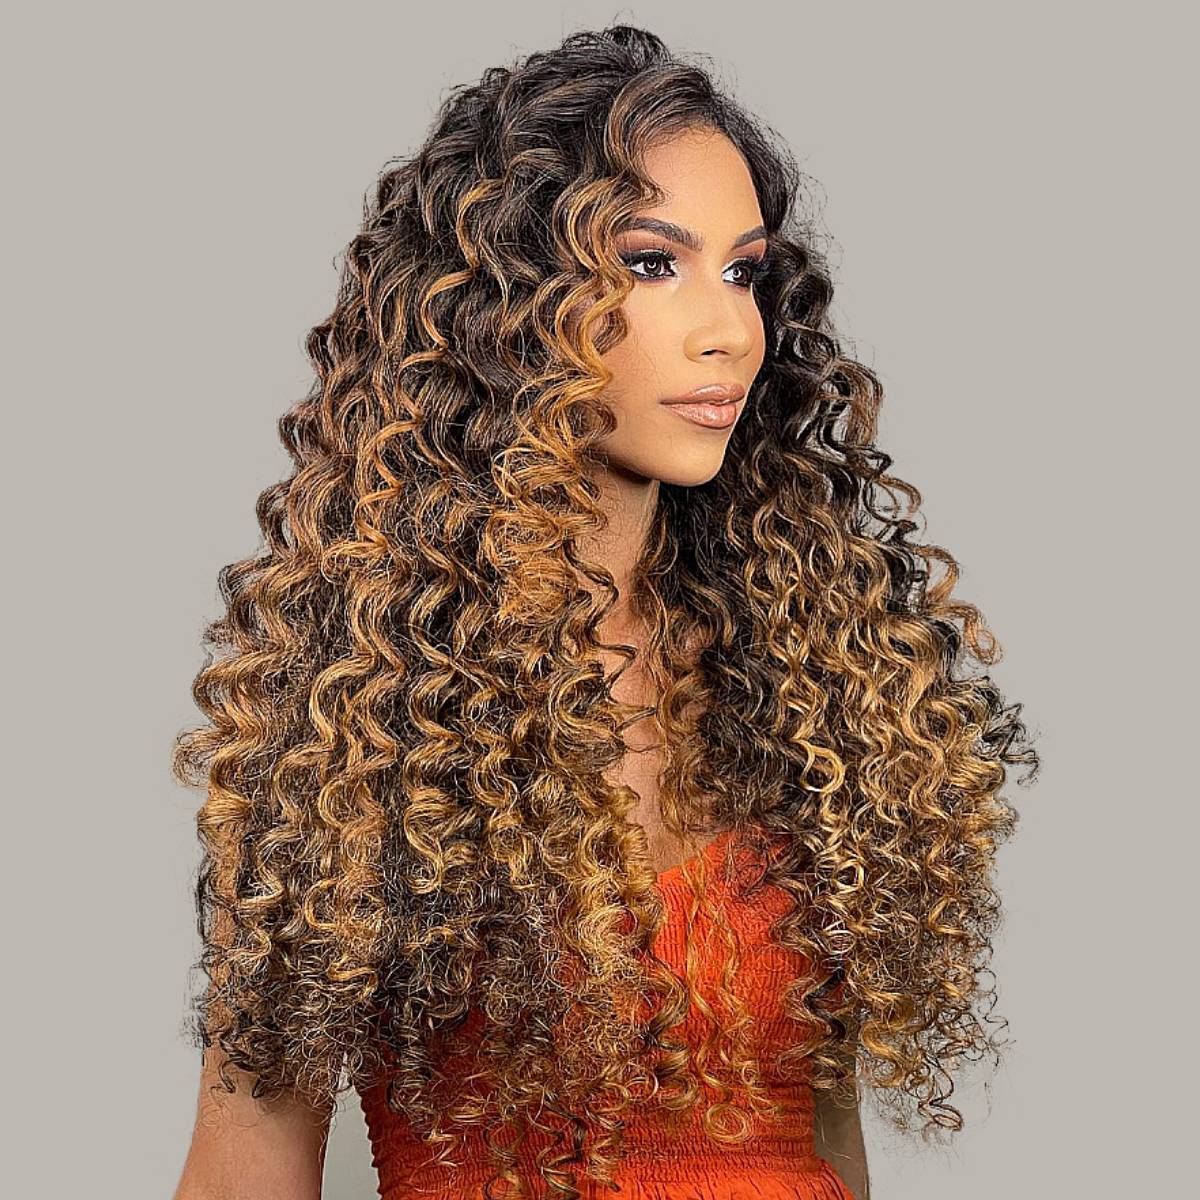 Top 139 + How to style your curly hair - Architectures-eric-boucher.com